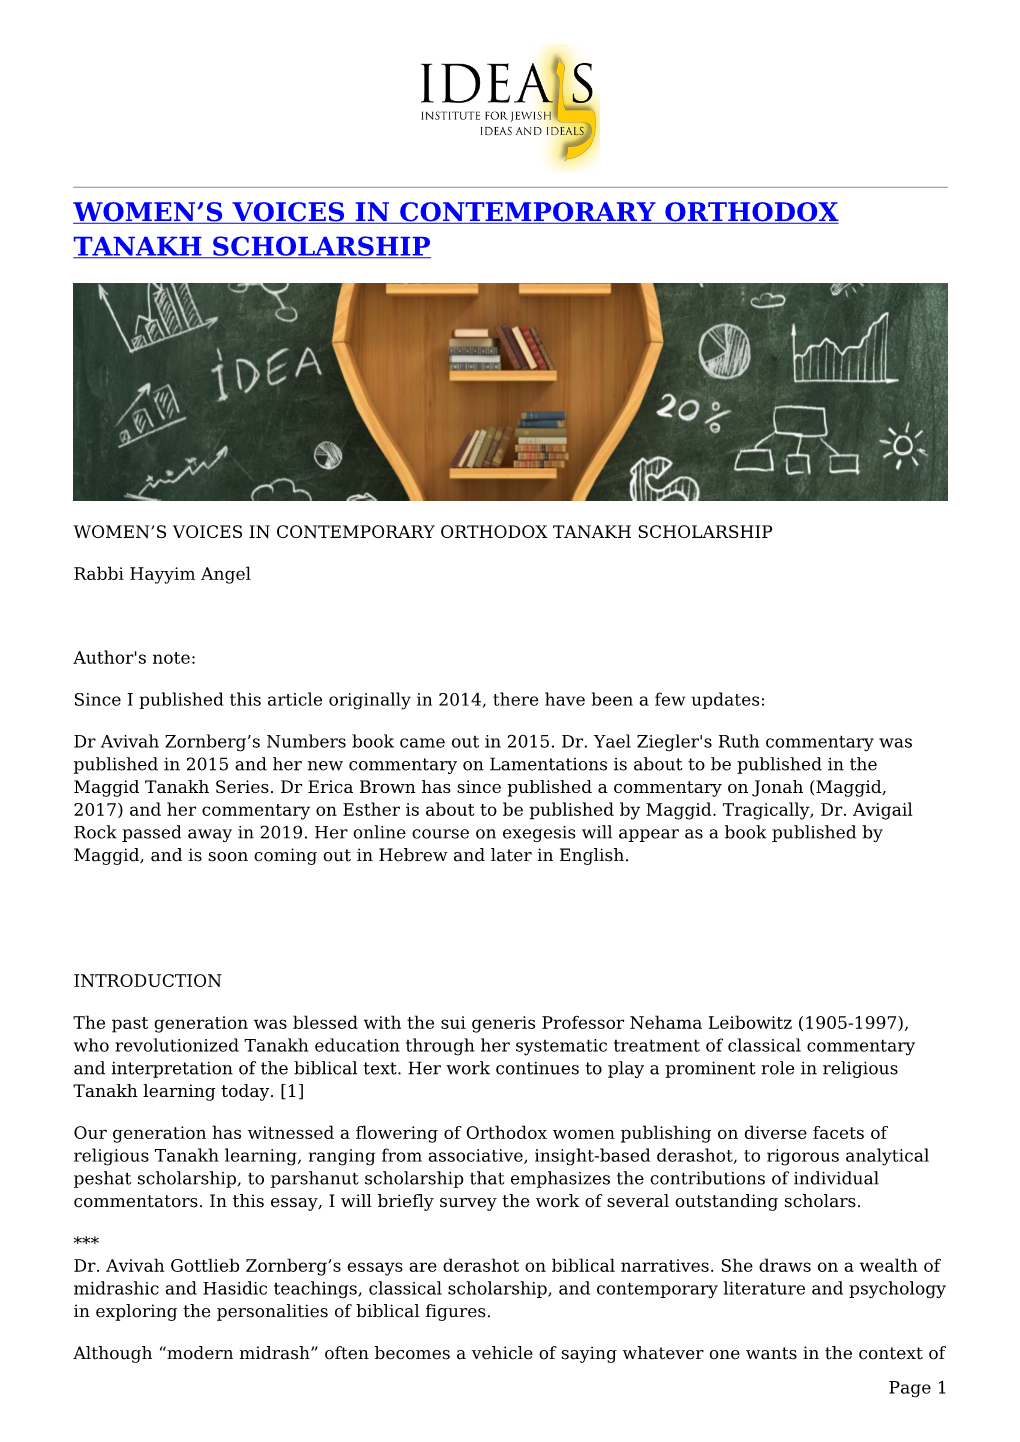 Women's Voices in Contemporary Orthodox Tanakh Scholarship